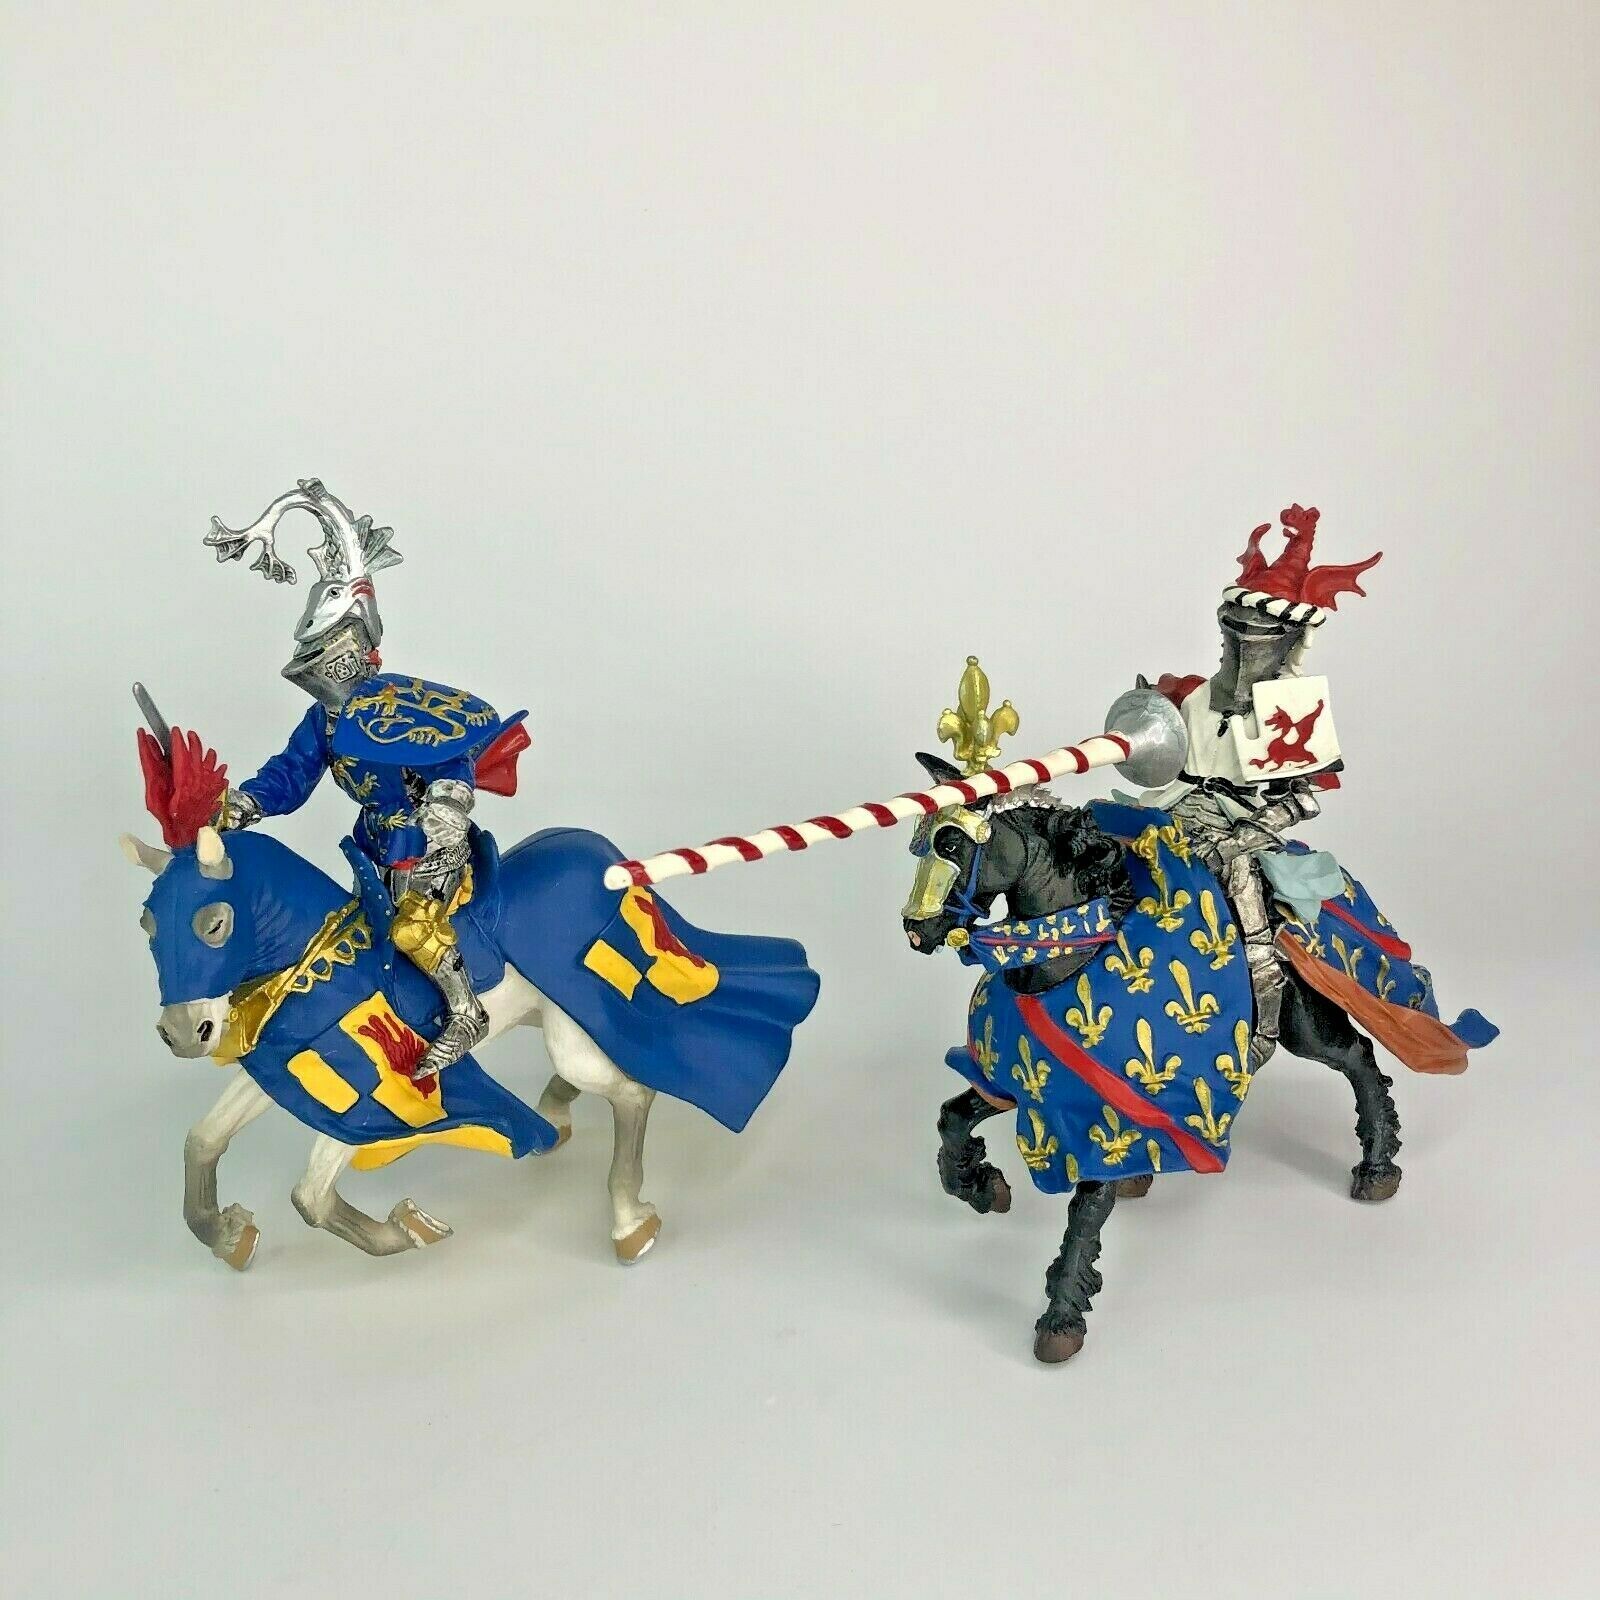 Plastoy Knights - 2 x Horse & Knight Figures Medieval Toy - Everything Else